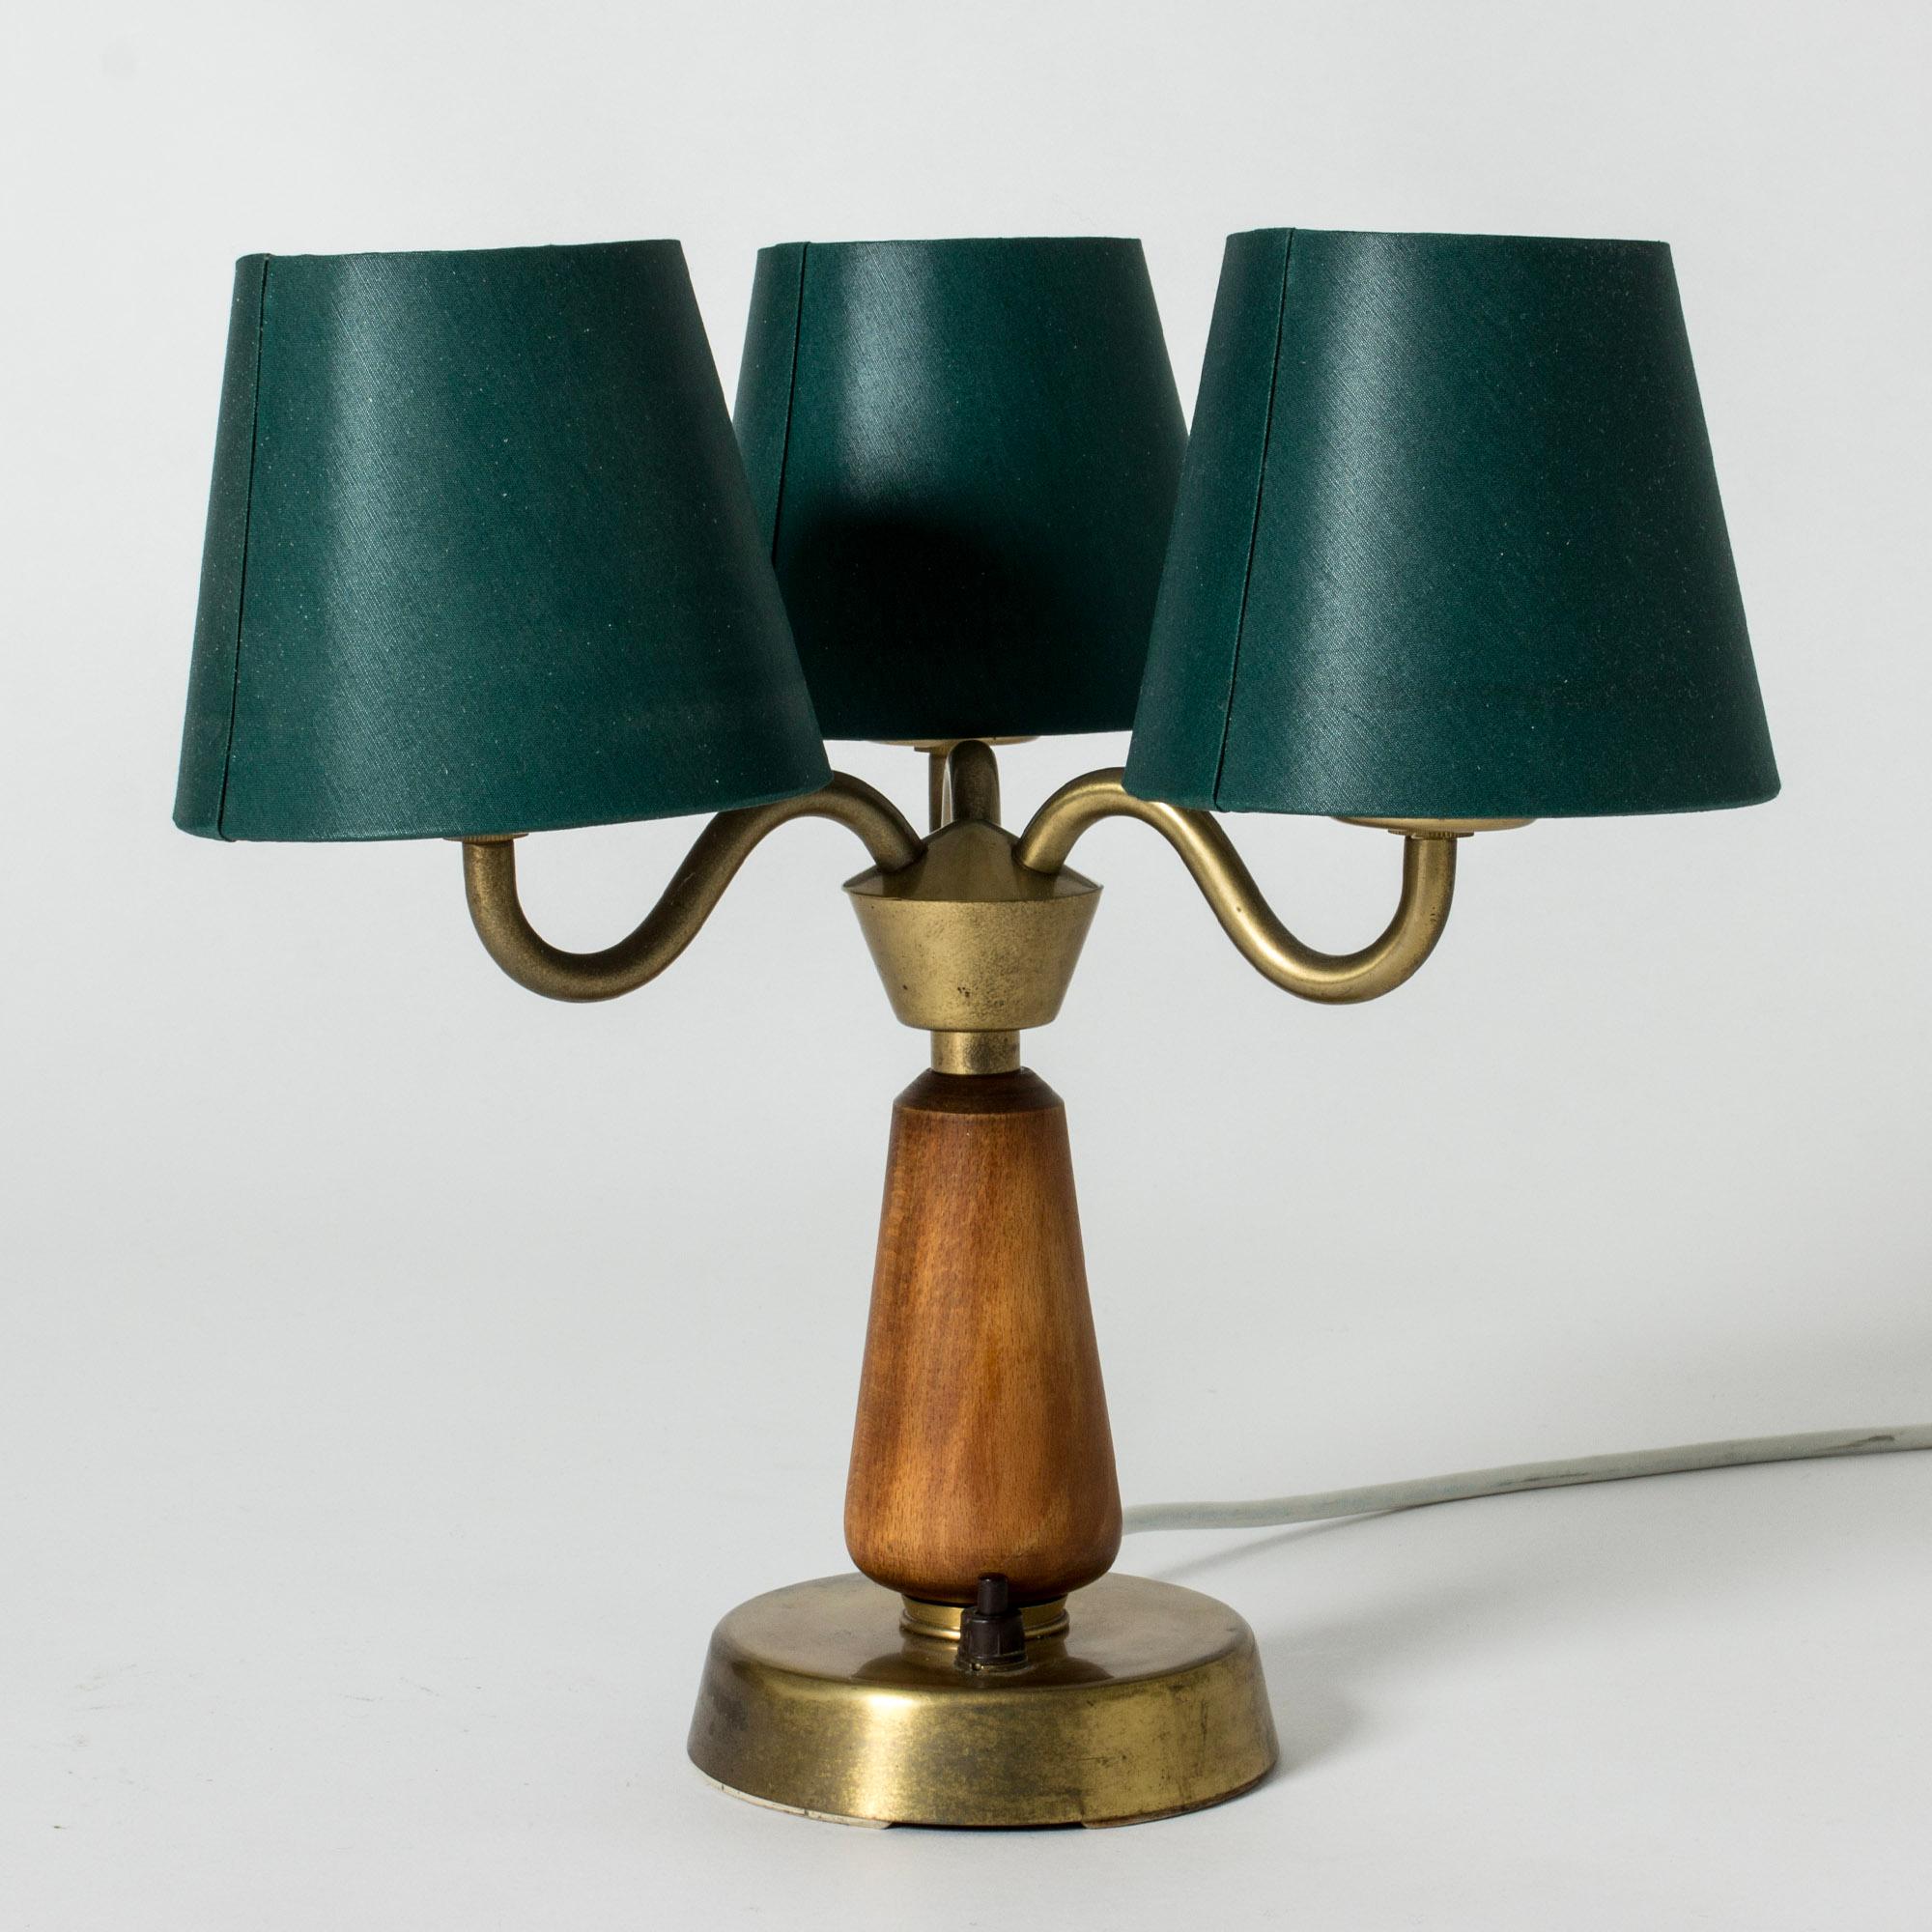 Mid-20th Century Midcentury Scandinavian Table Lamps from ASEA, Sweden, 1950s For Sale